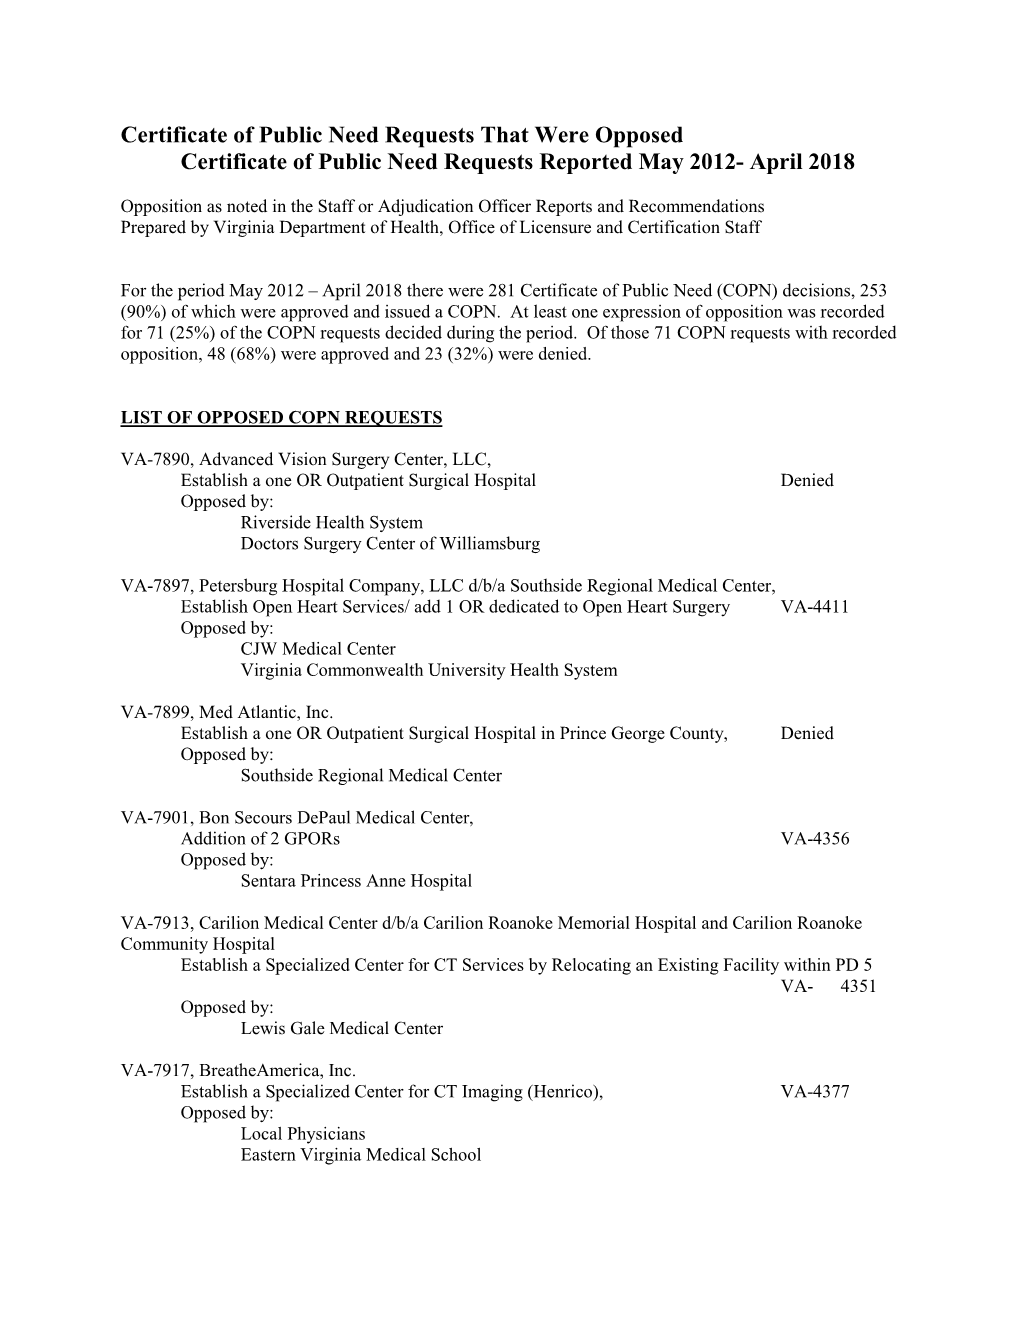 Certificate of Public Need Requests That Were Opposed Certificate of Public Need Requests Reported May 2012- April 2018